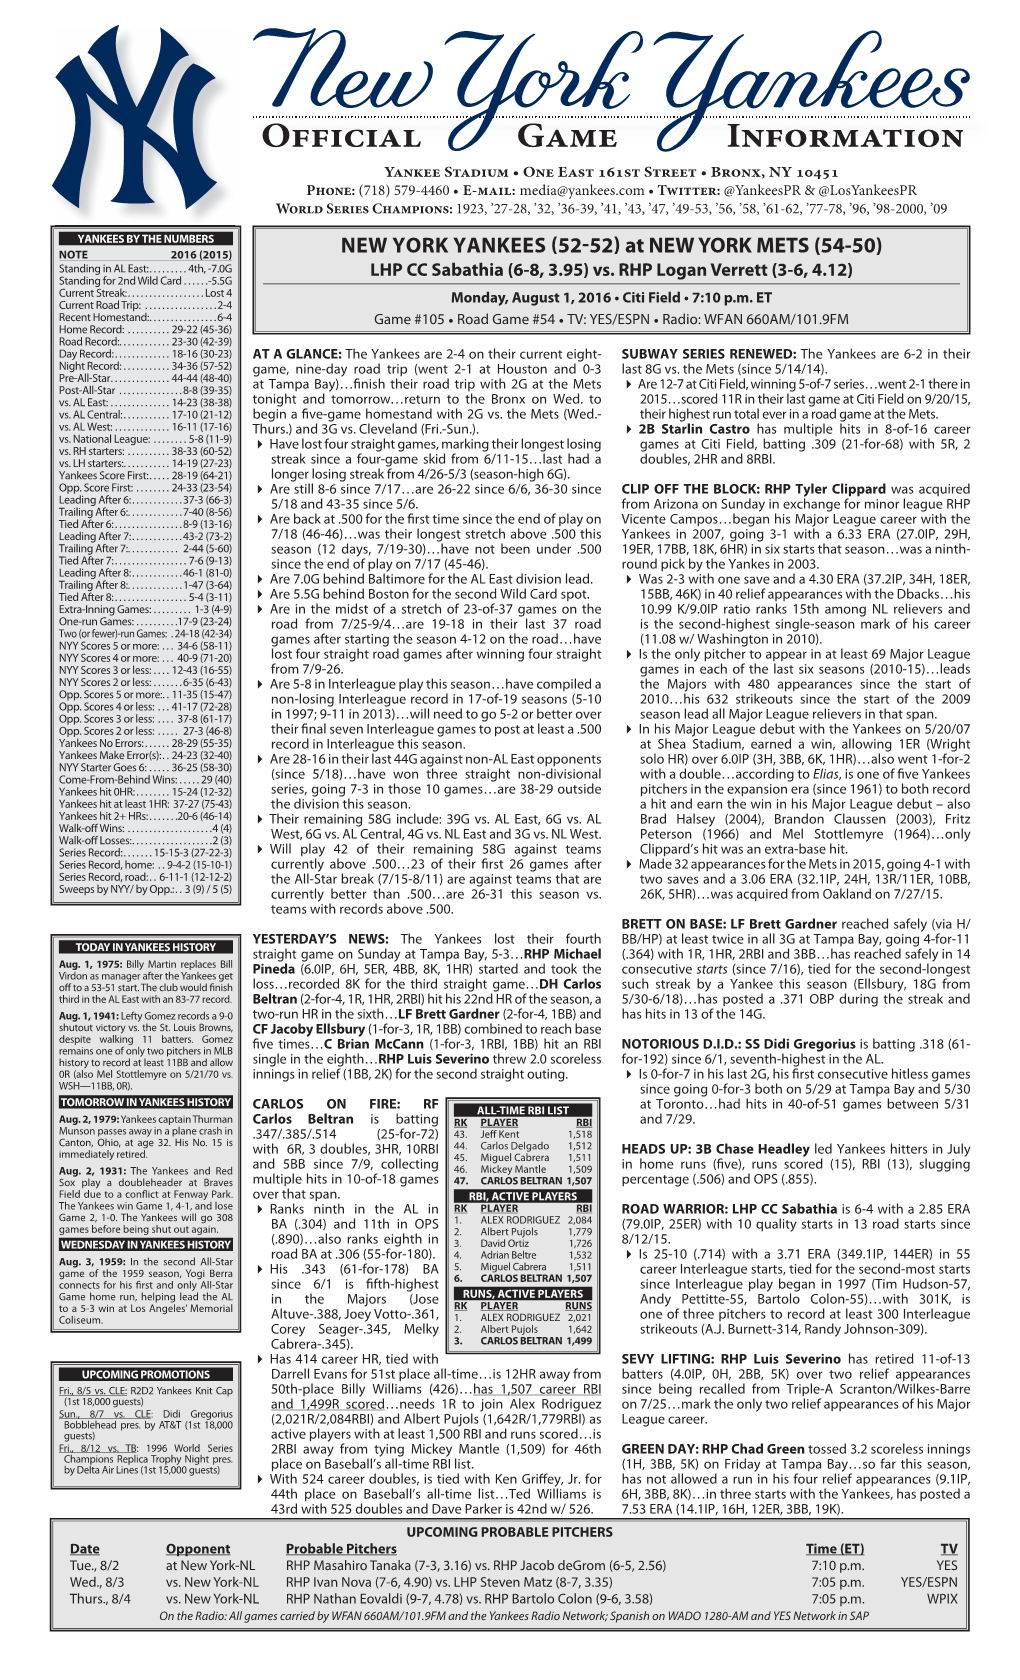 NYY Game Notes 08-01-16 at New York-NL.Indd